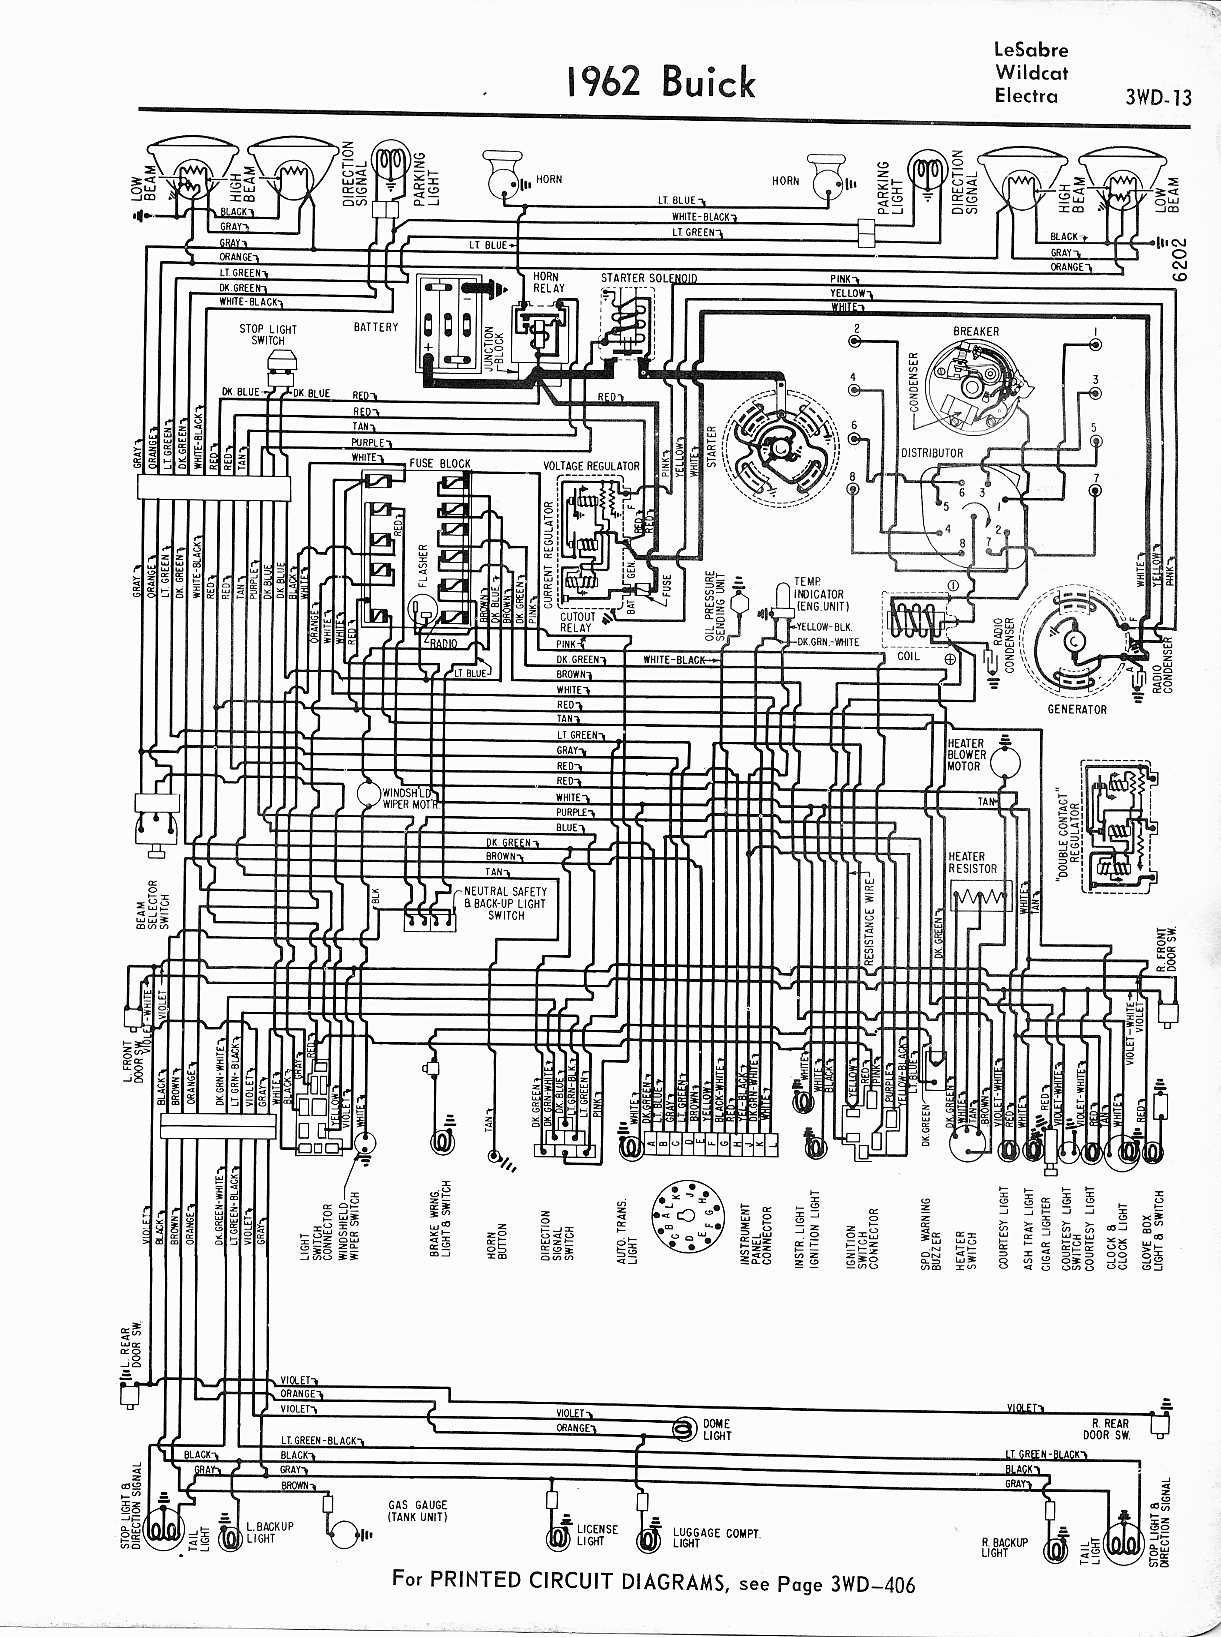 1971 Buick Wiring Diagram from www.oldcarmanualproject.com